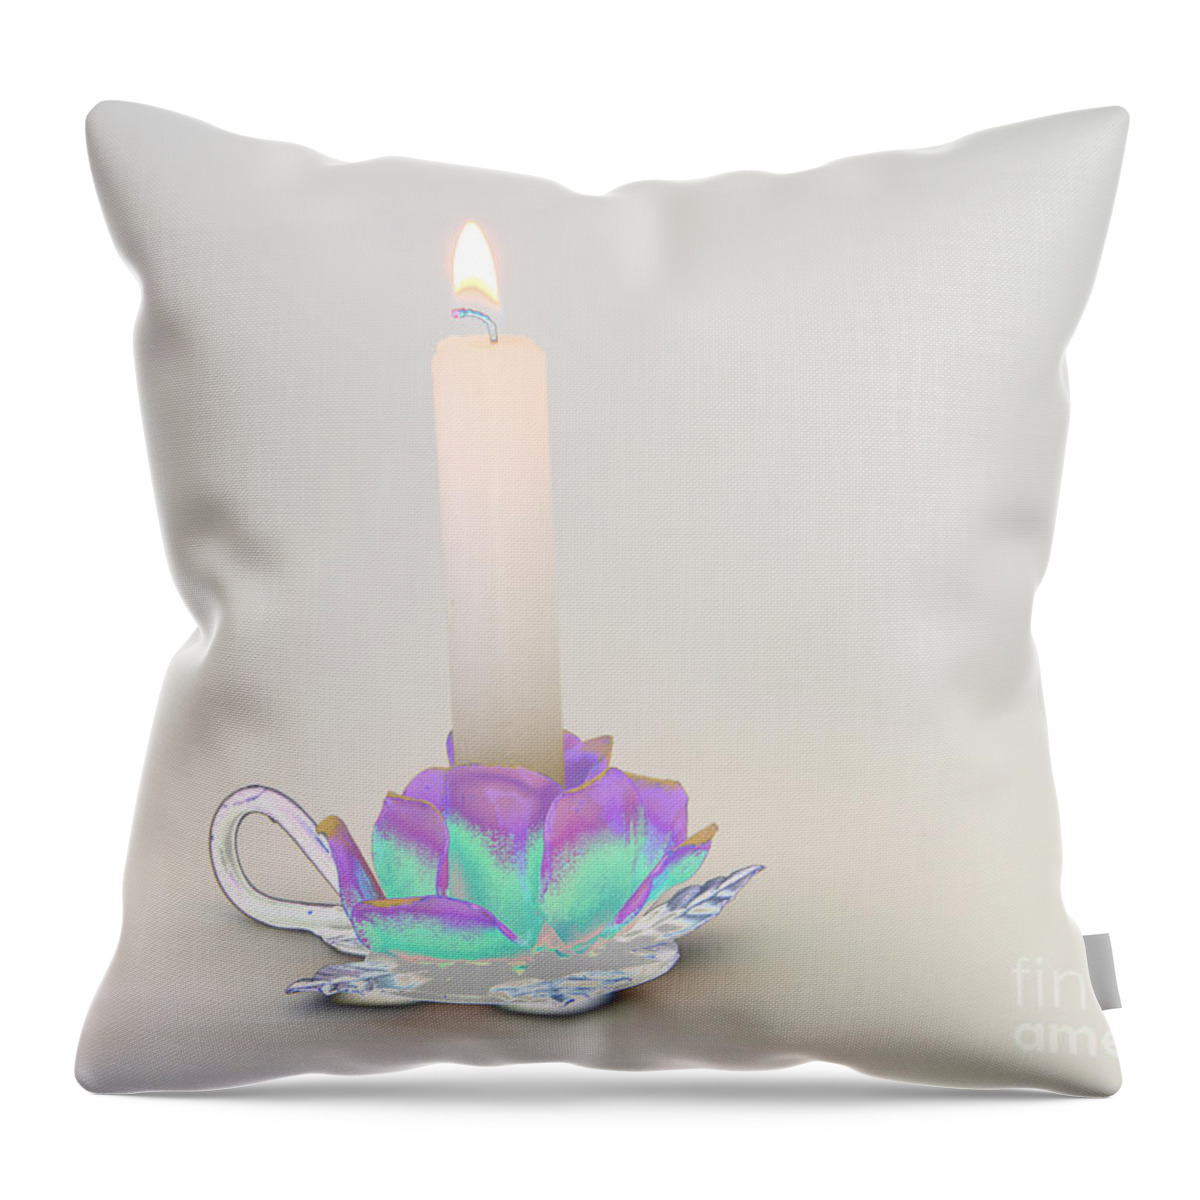 Candle Throw Pillow featuring the photograph Candle in Holder by Kae Cheatham